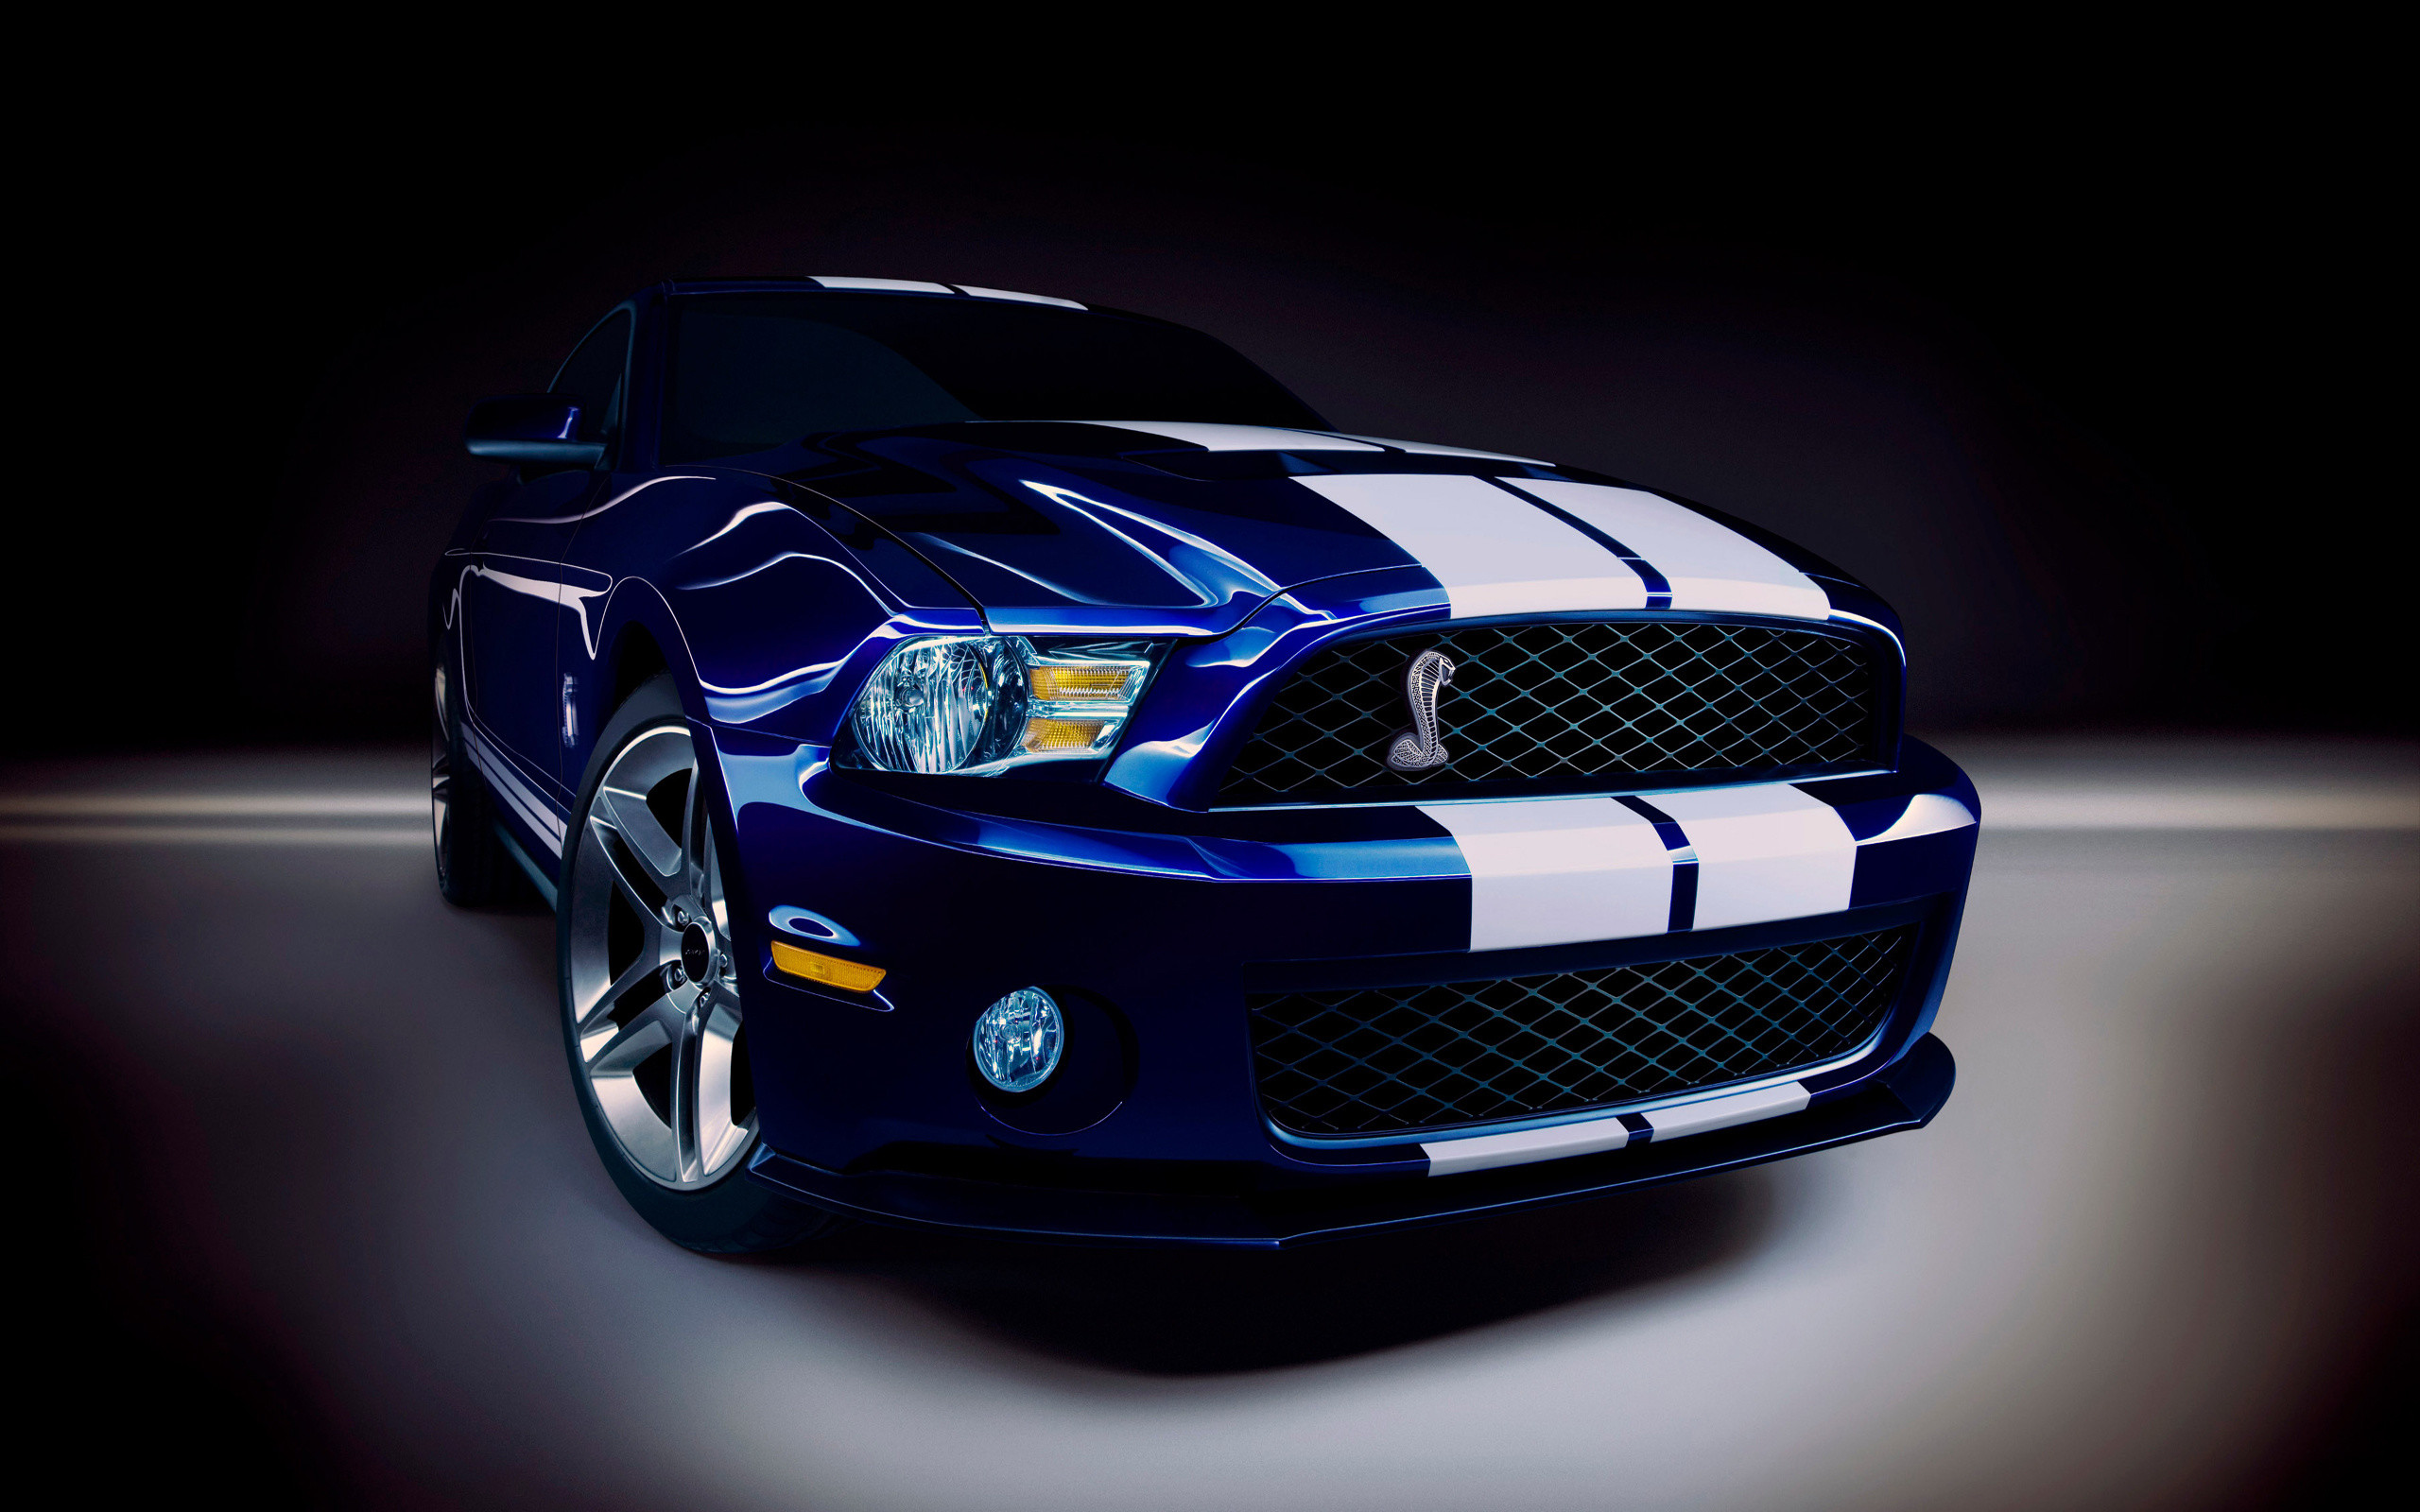 2560x1600 colorful pictures of muscle cars | Wallpaper Ford Mustang Muscle Car Desktop  Hd Desktop Wallpapers Design